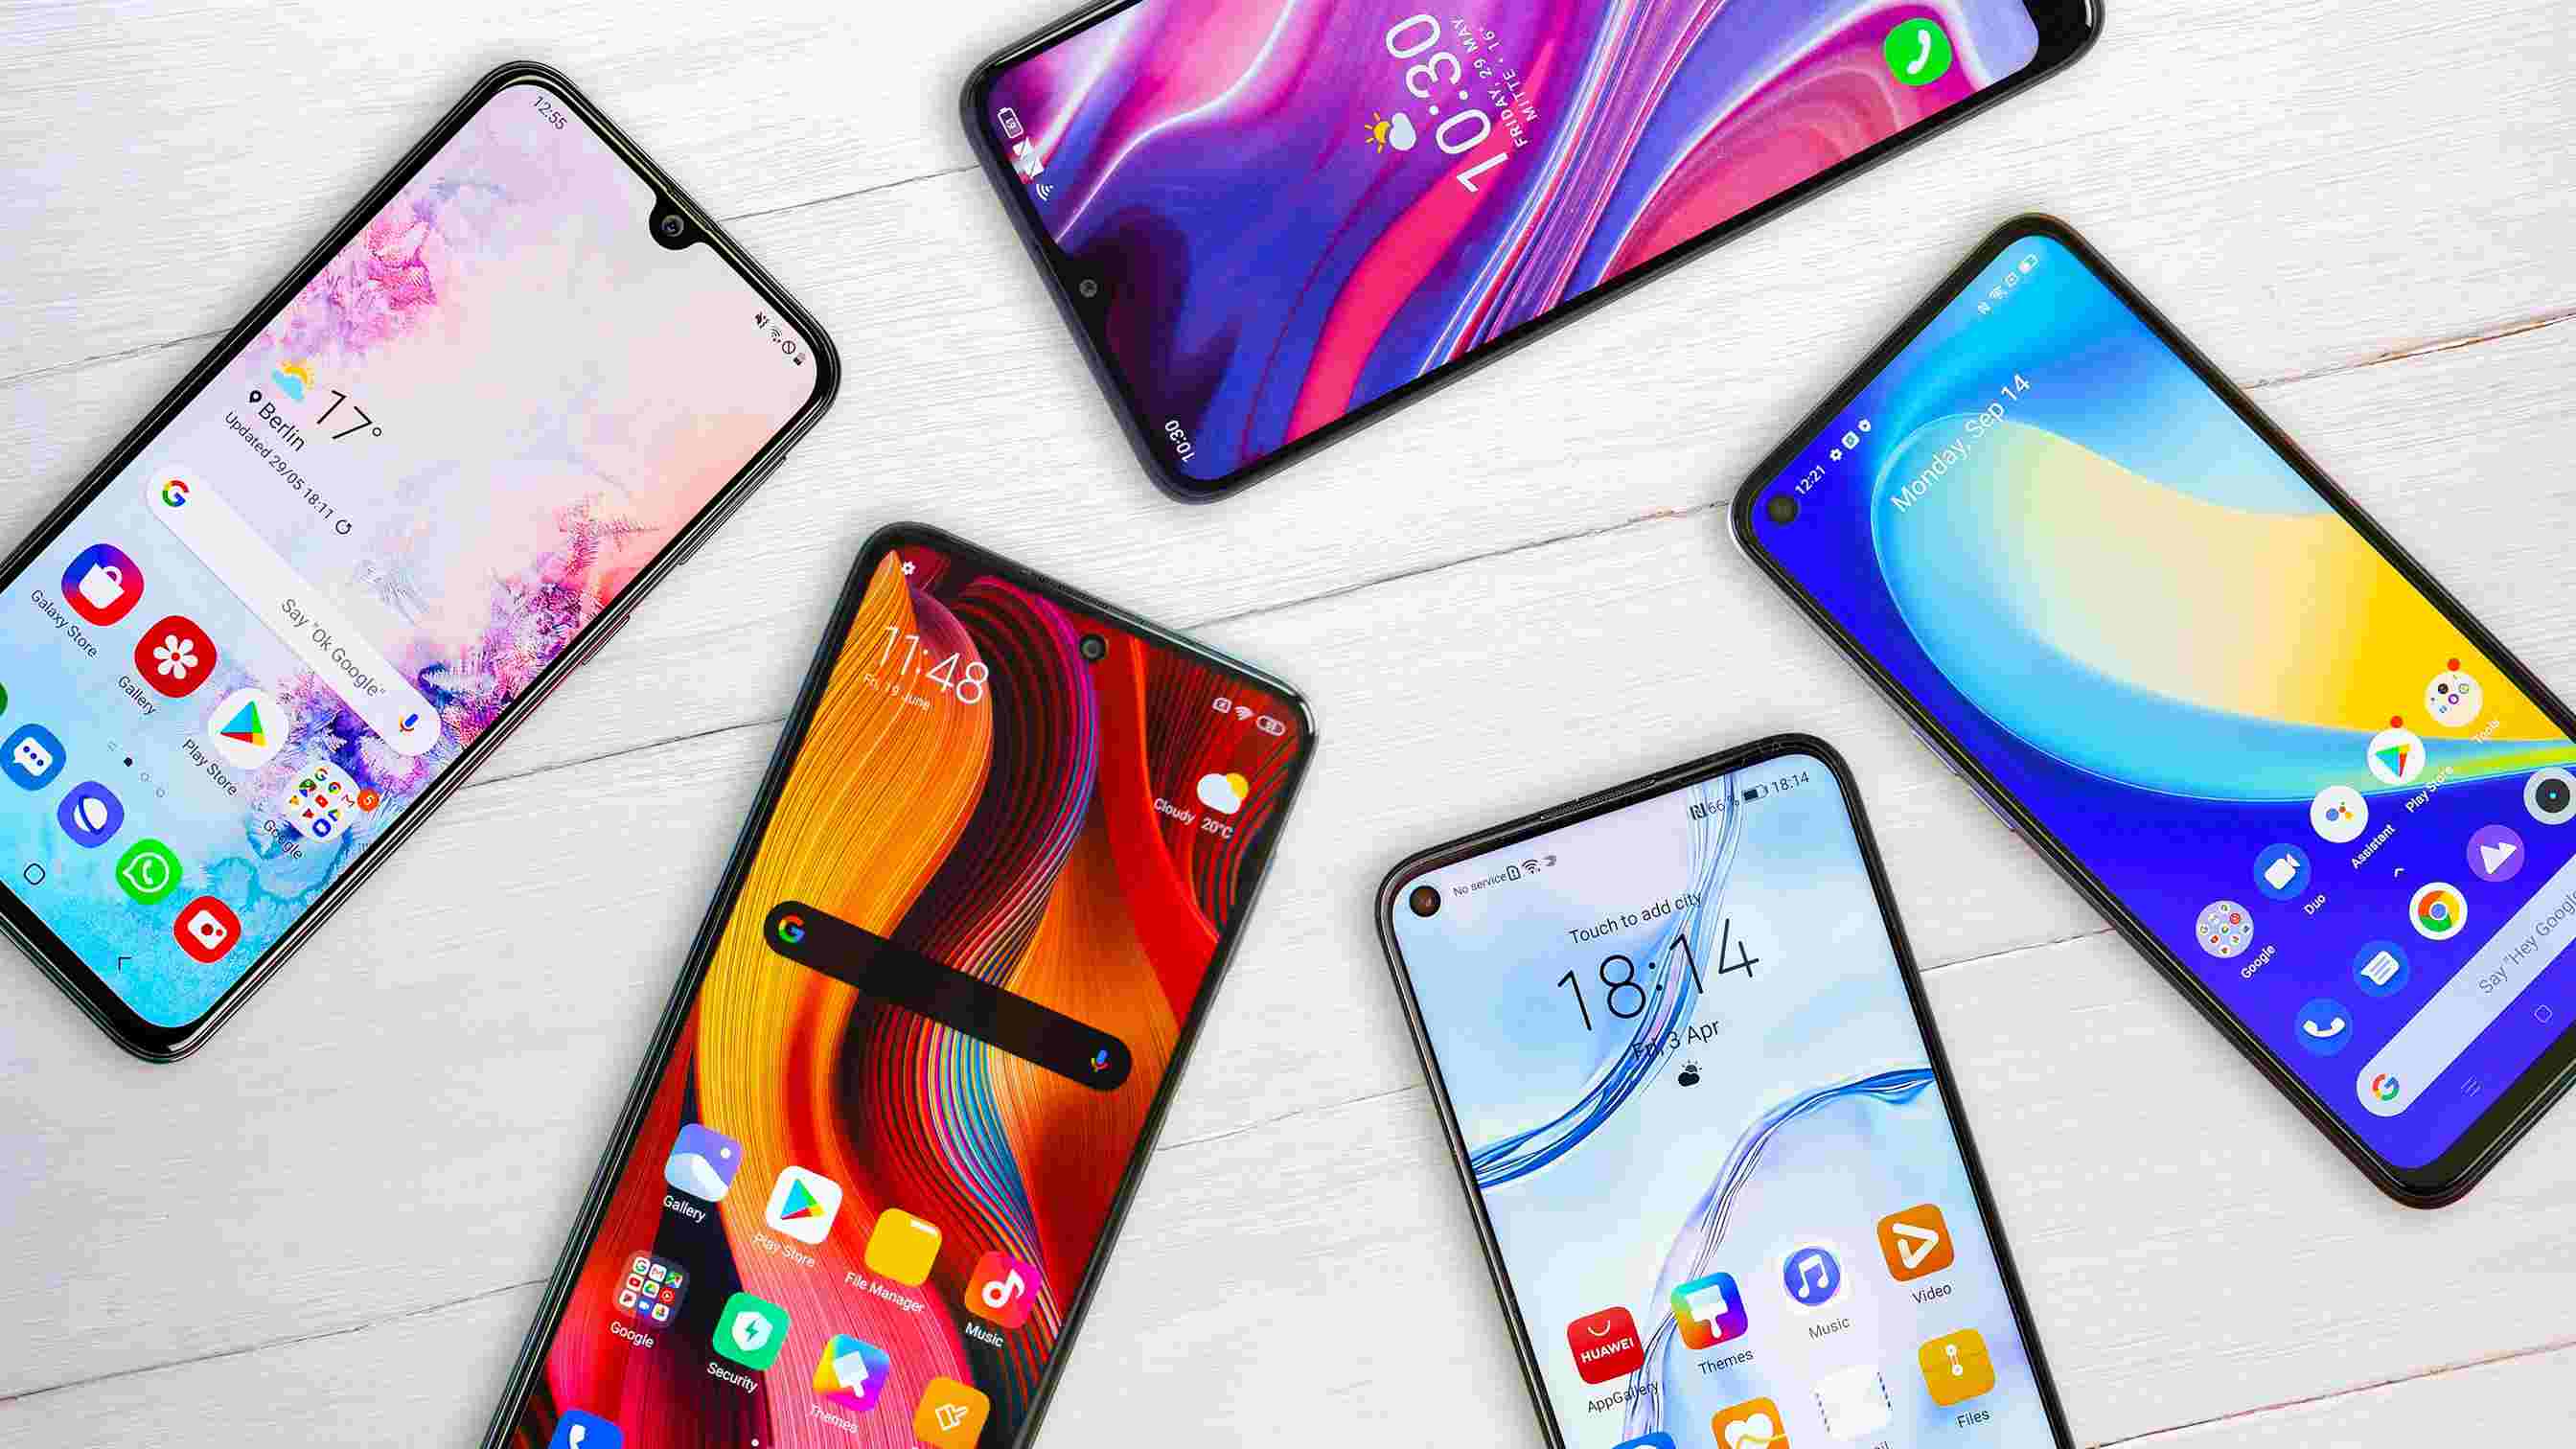 Everything you should know before buying Vivo Y91 this new year